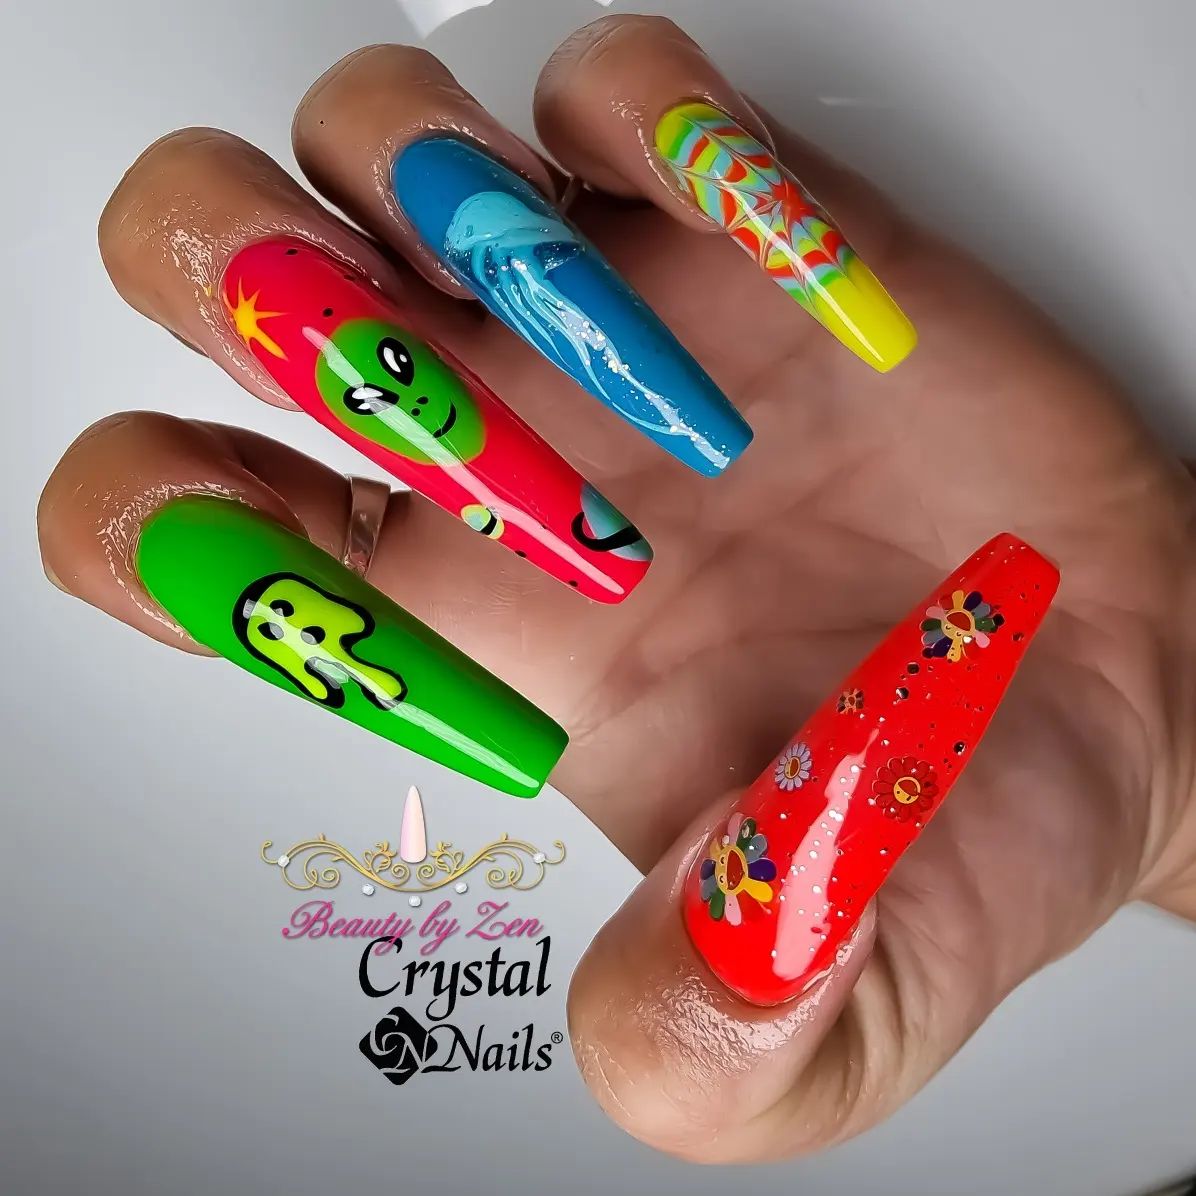 Why not having fun with your ballerina nails? All you need to do is apply colorful nail polishes first and draw different designs on top of of your nails. They could be an alien, a ghost or even a jelly fish!